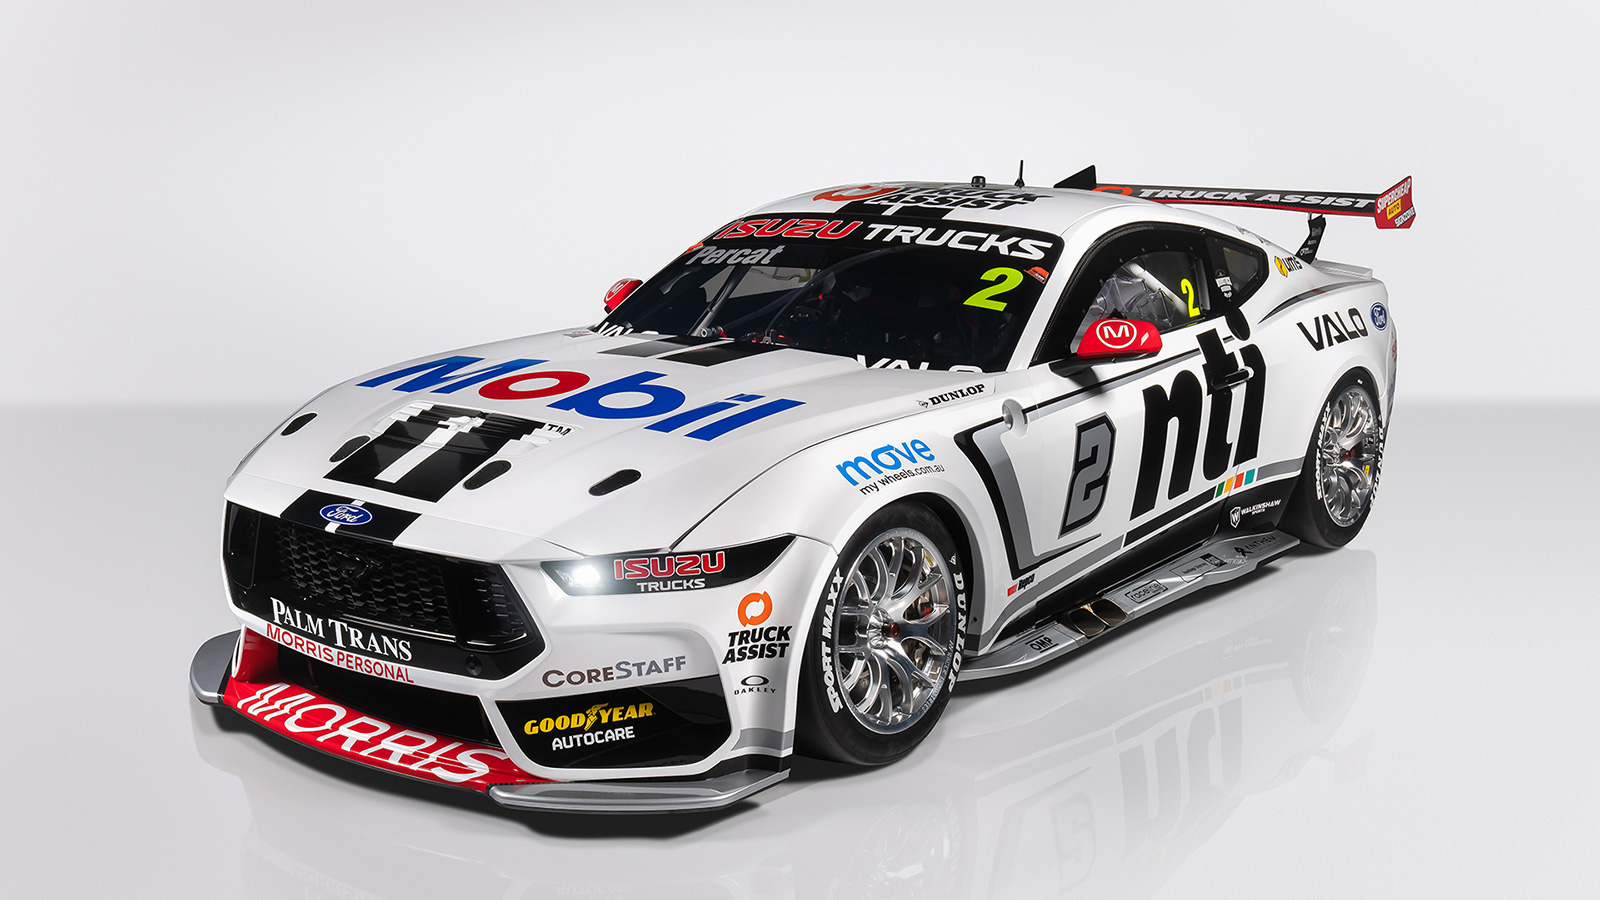 The Mobil 1™ NTI Racing No. 2 Ford Mustang GT.